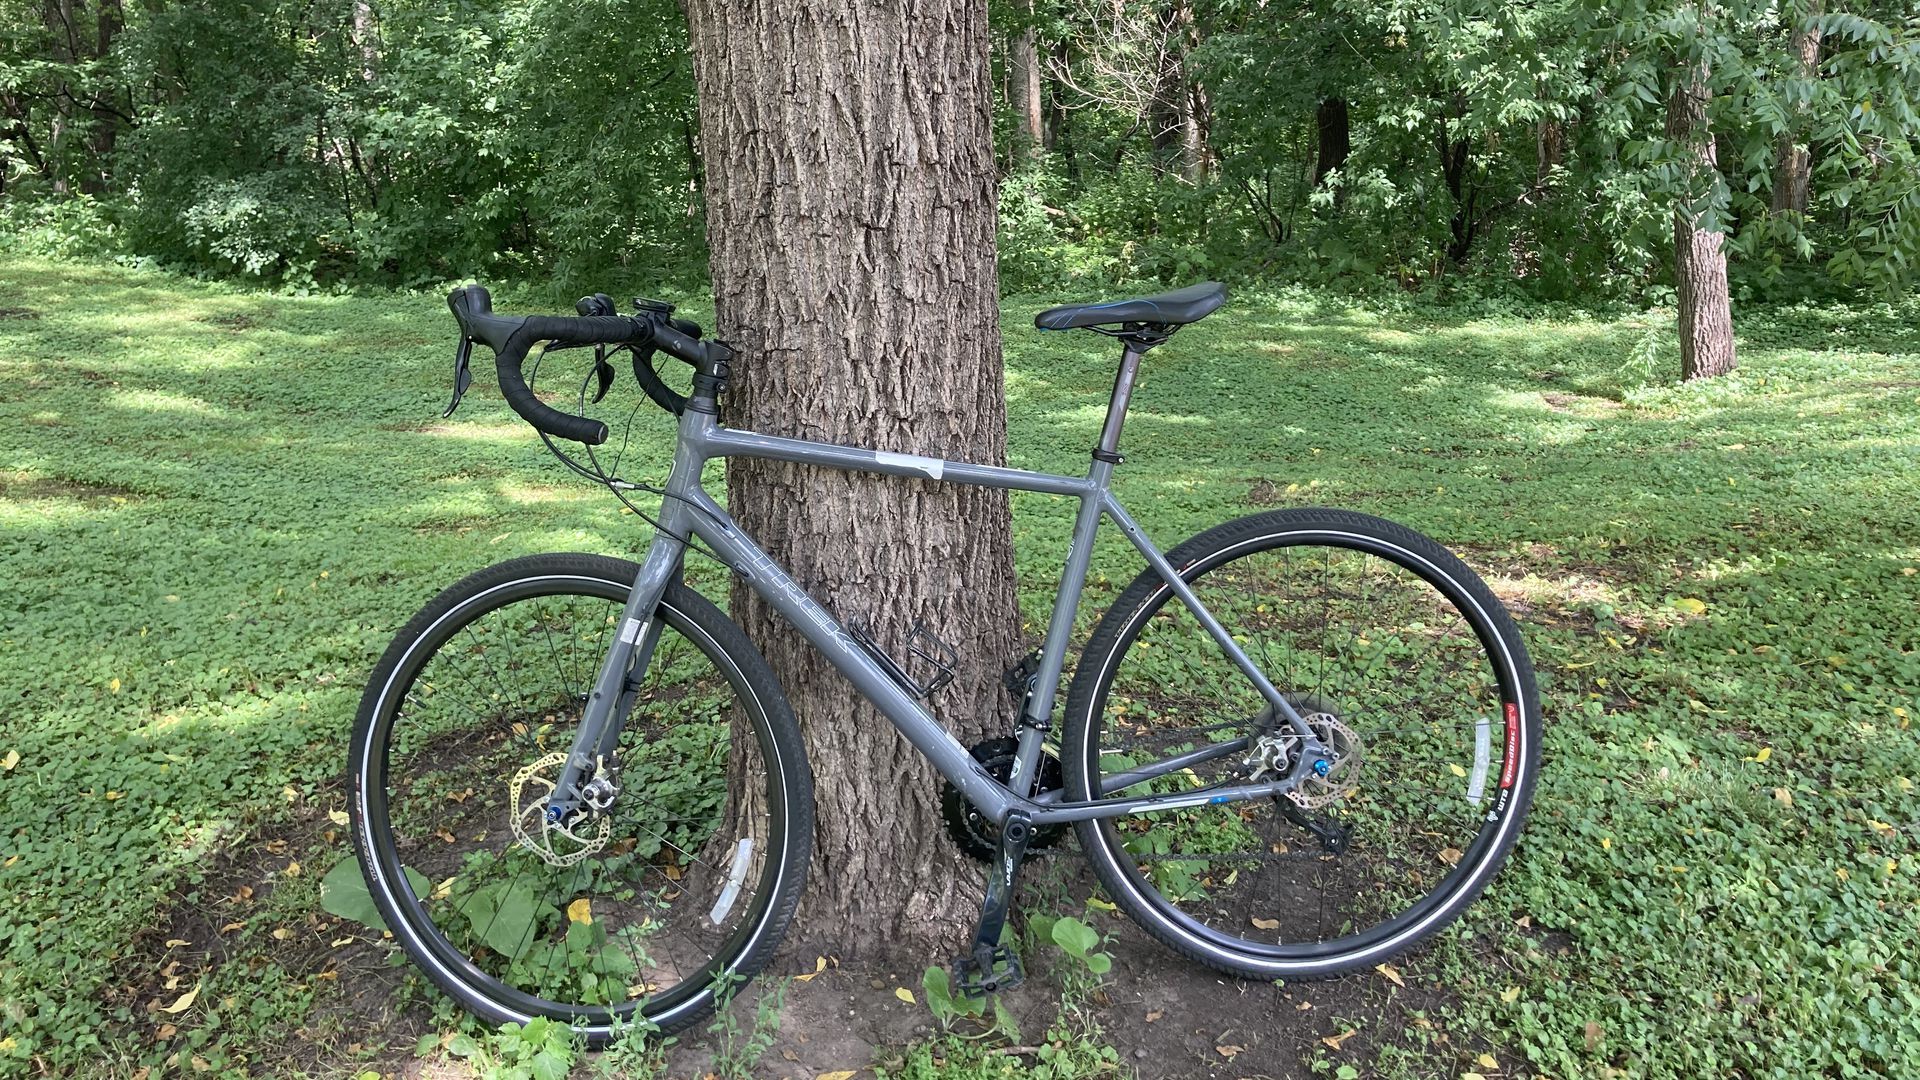 A photo of a gray bicycle rested against the trunk of a tree.